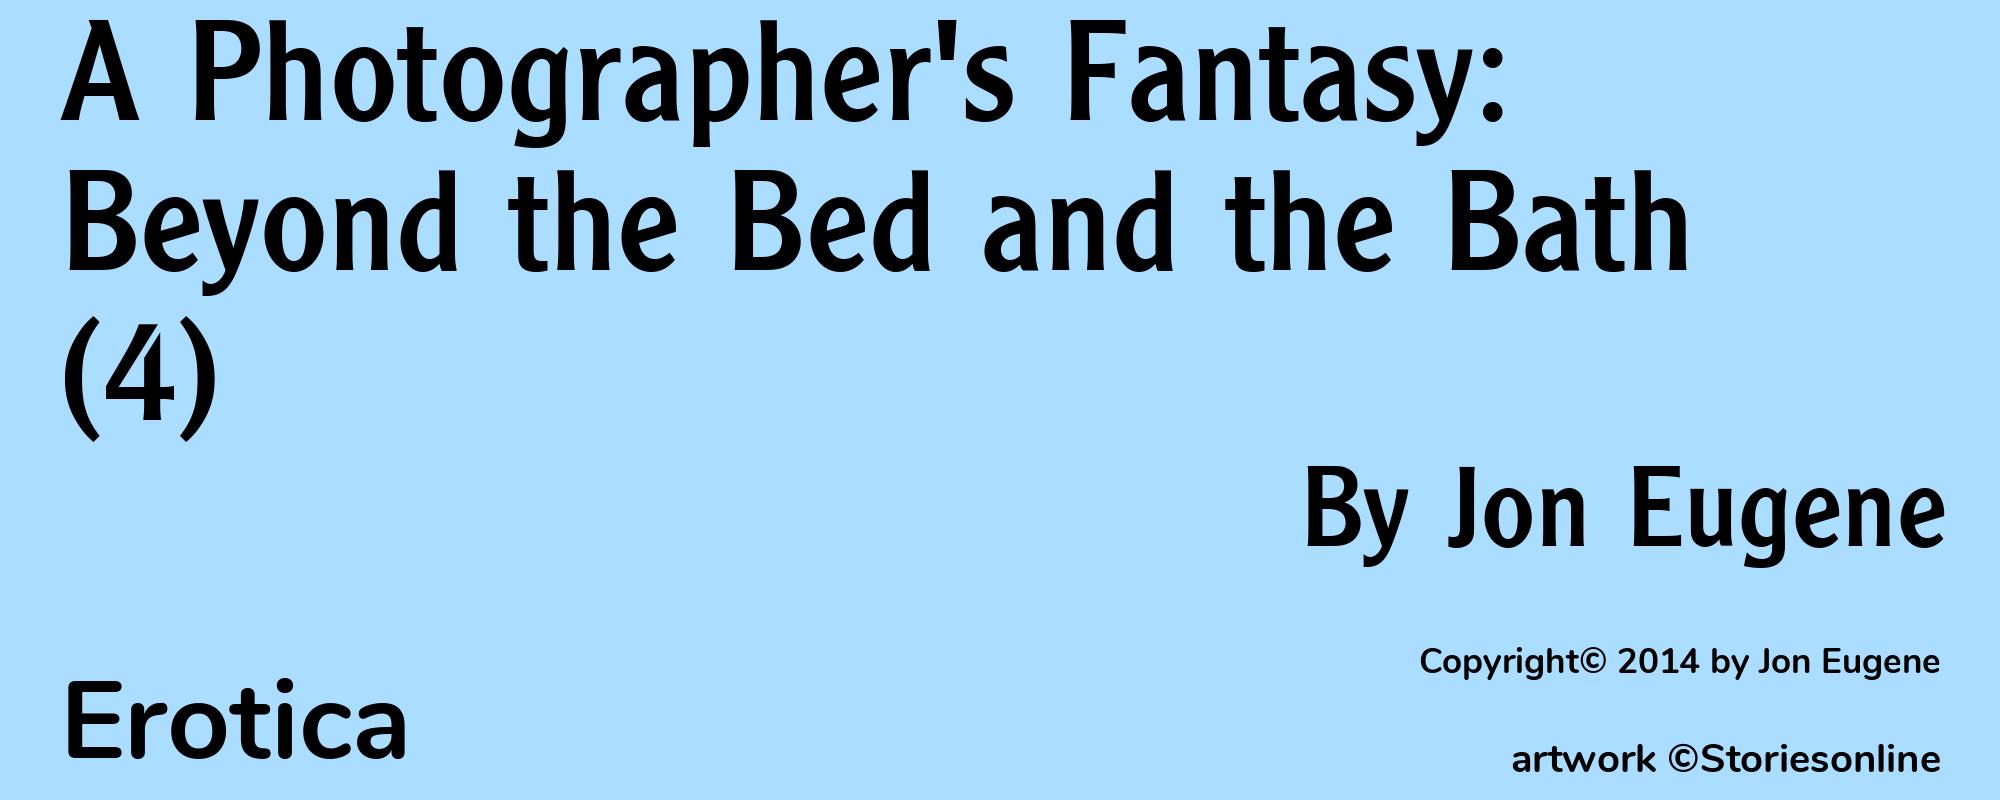 A Photographer's Fantasy: Beyond the Bed and the Bath (4) - Cover